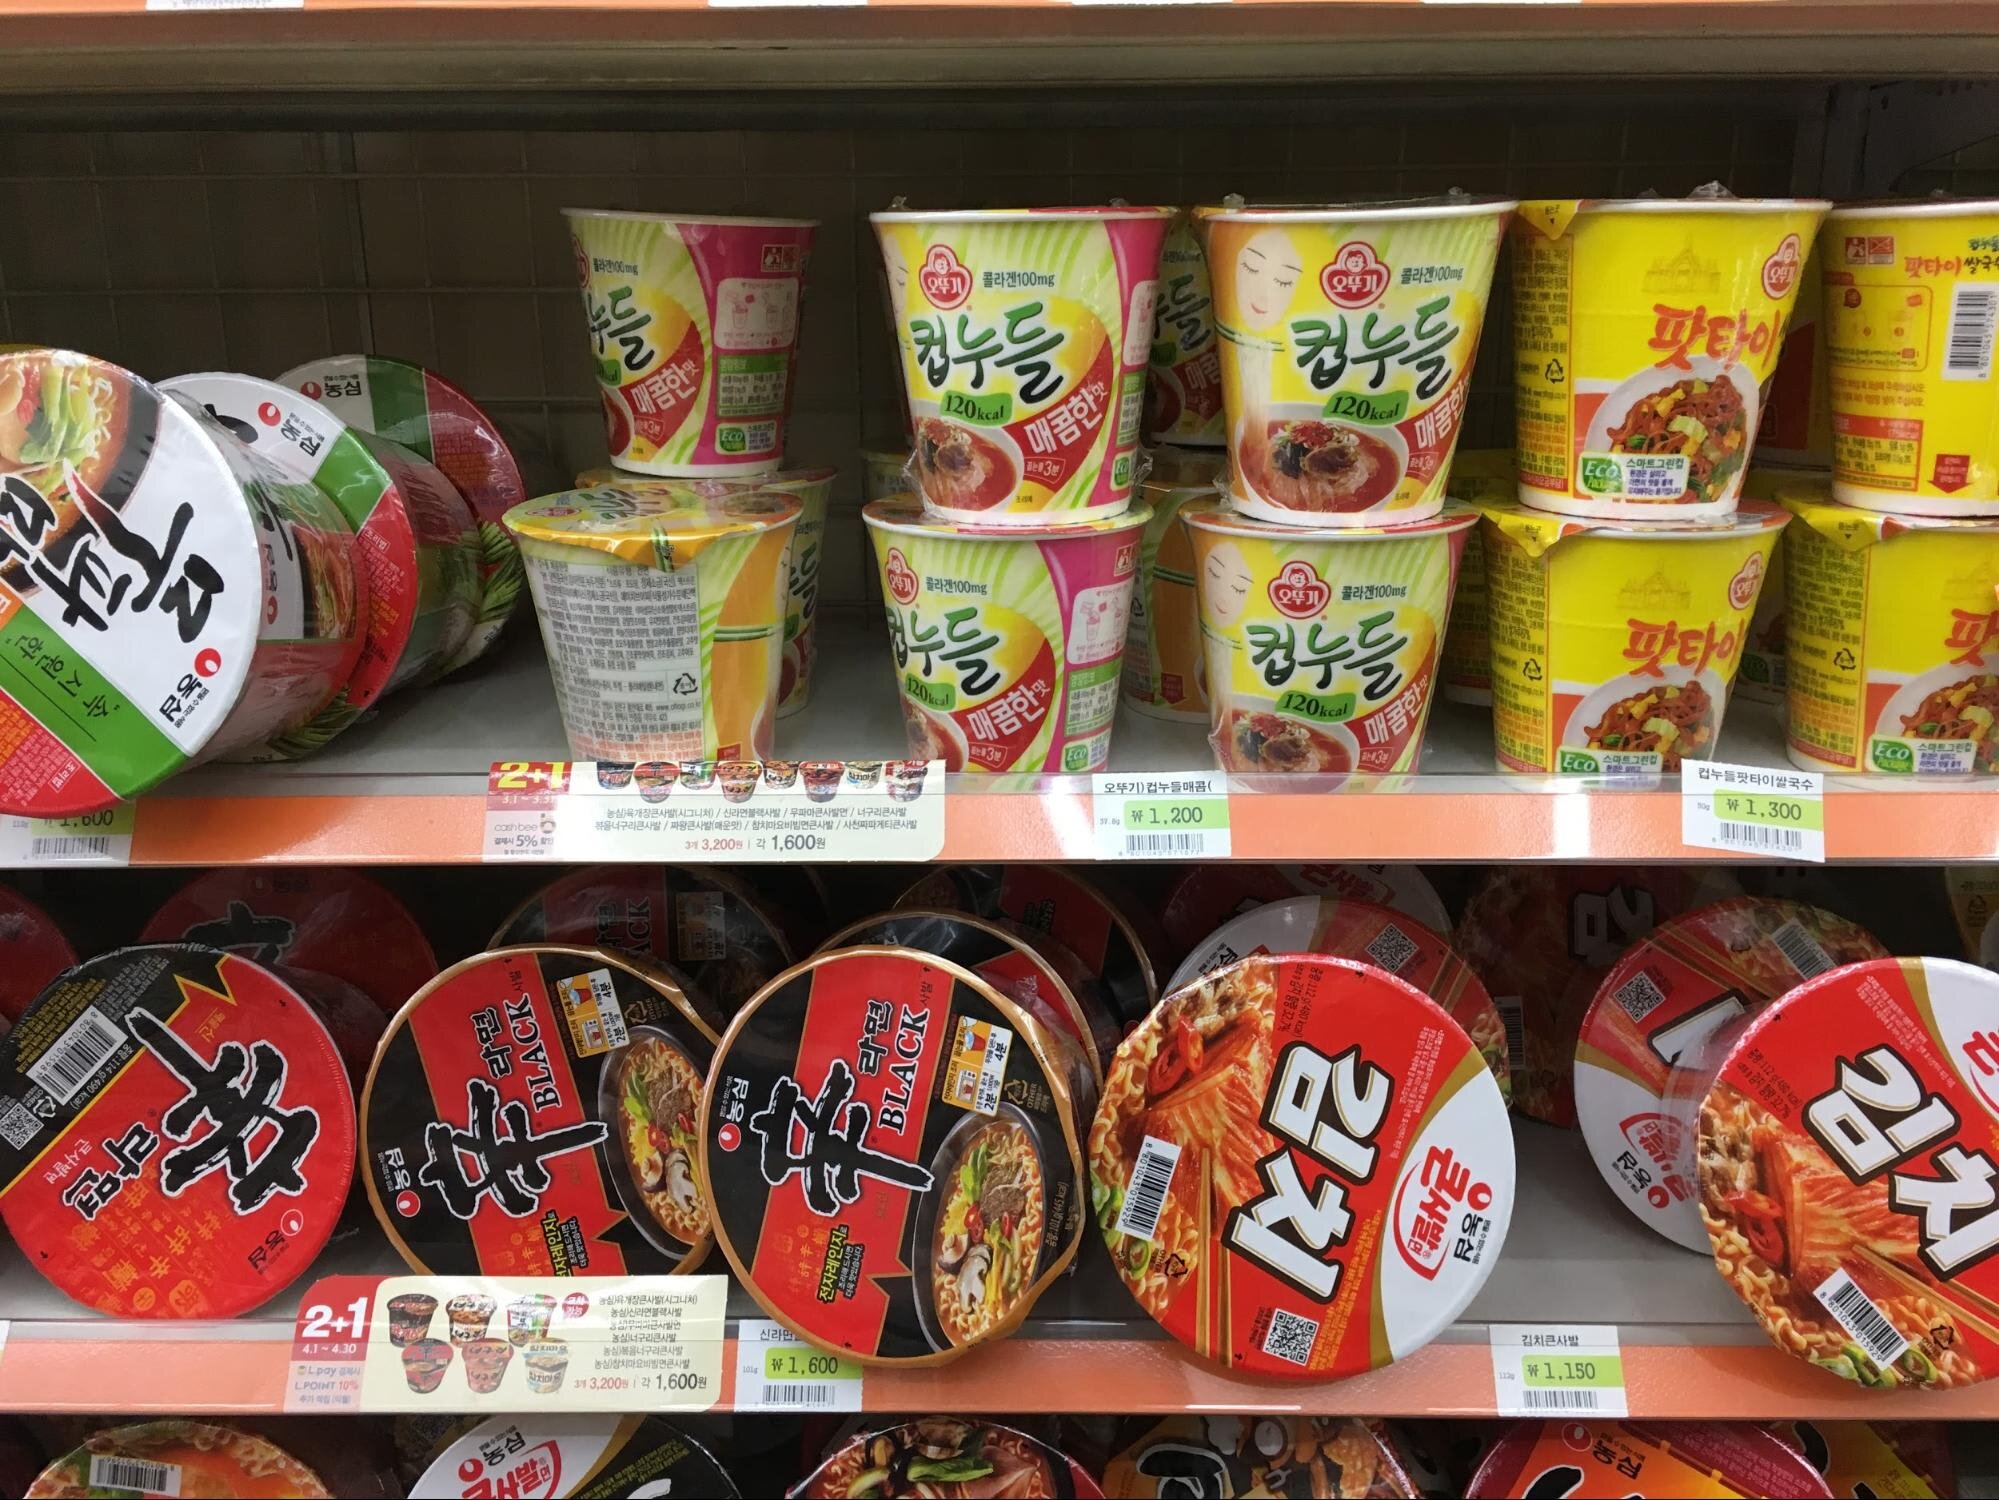 ramen, which comes in a million varieties